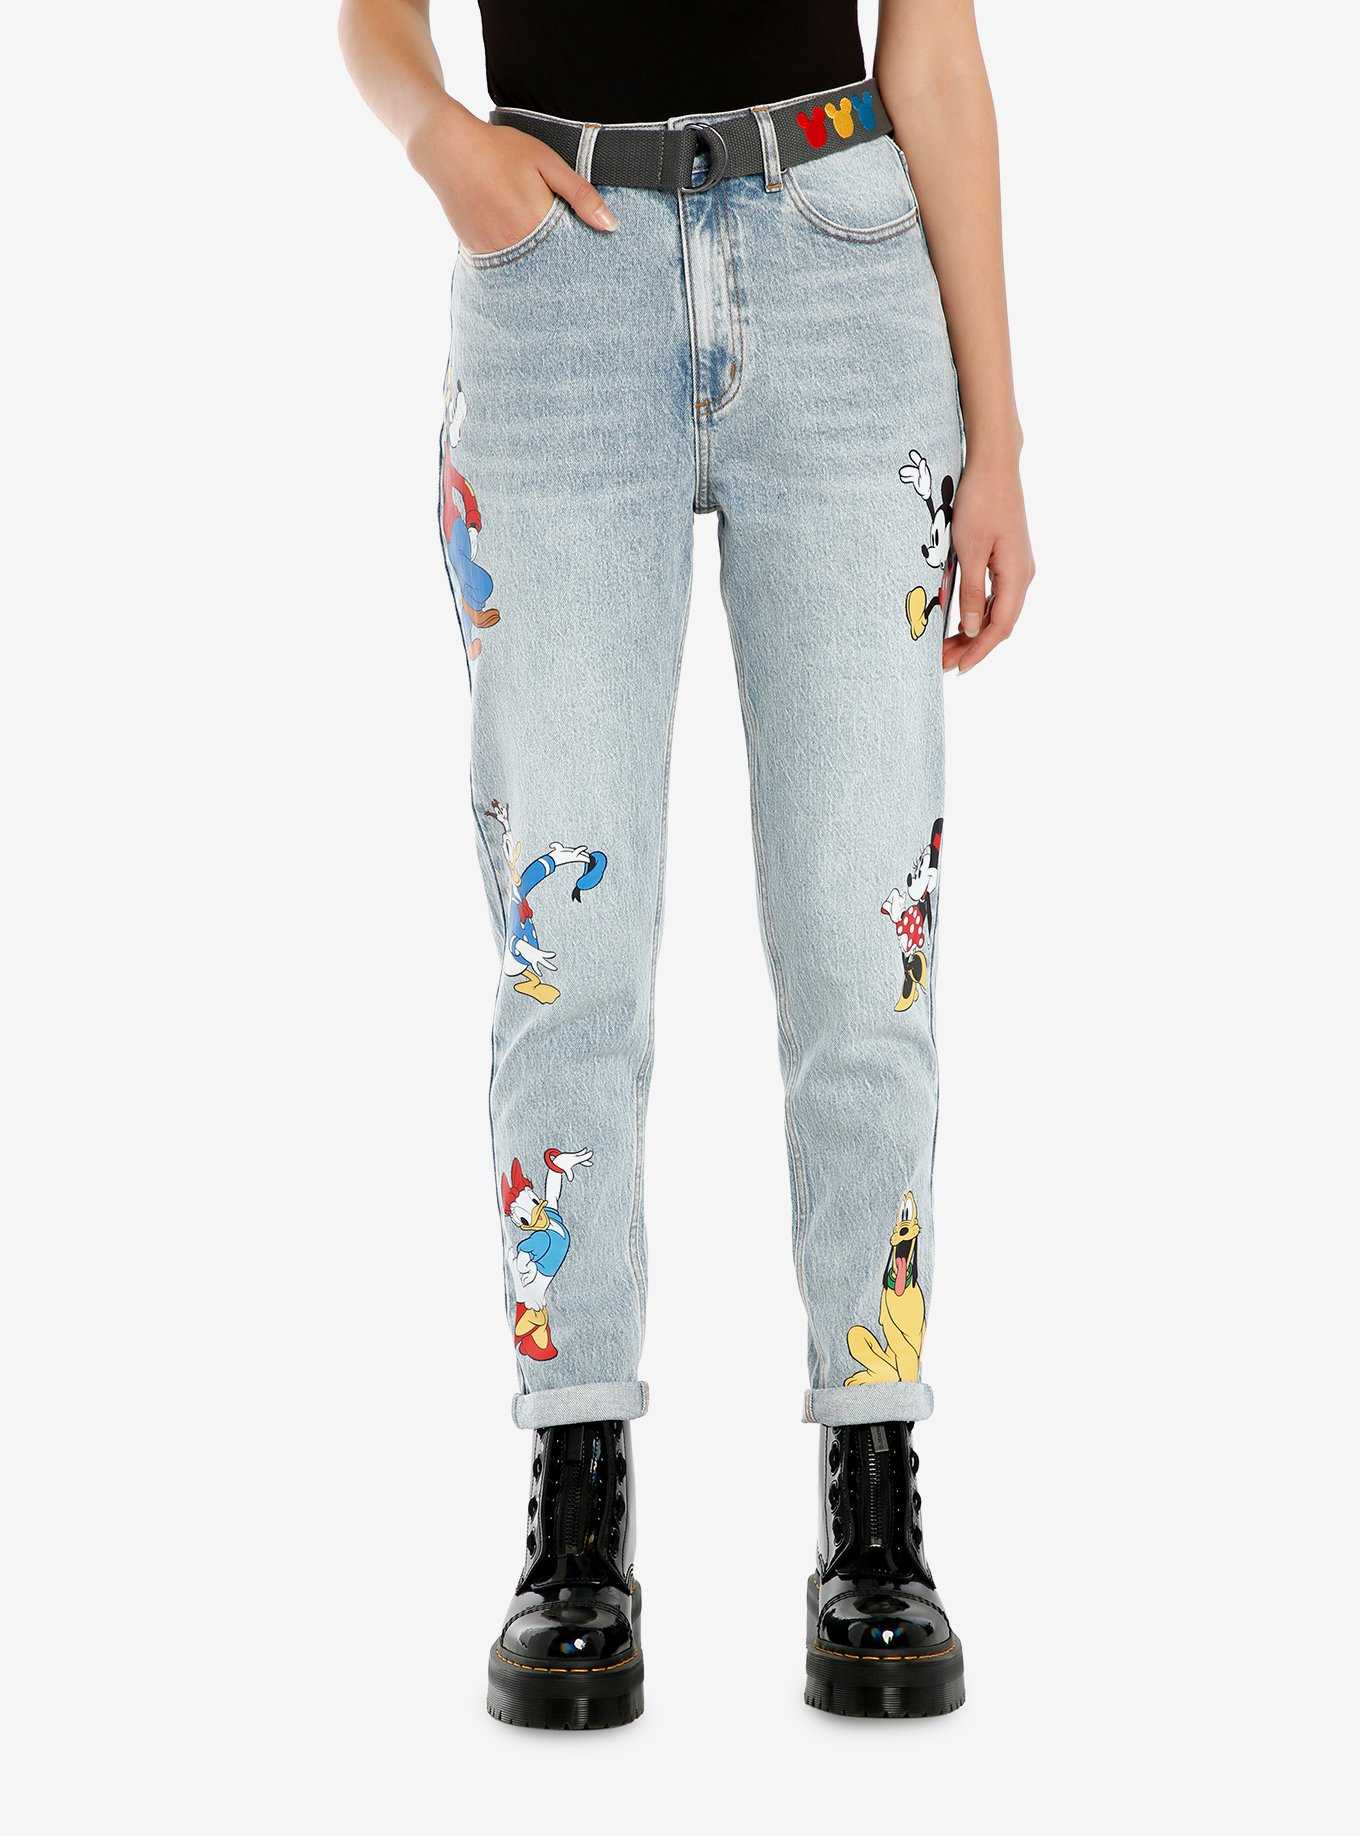 Mickey Mouse Pants